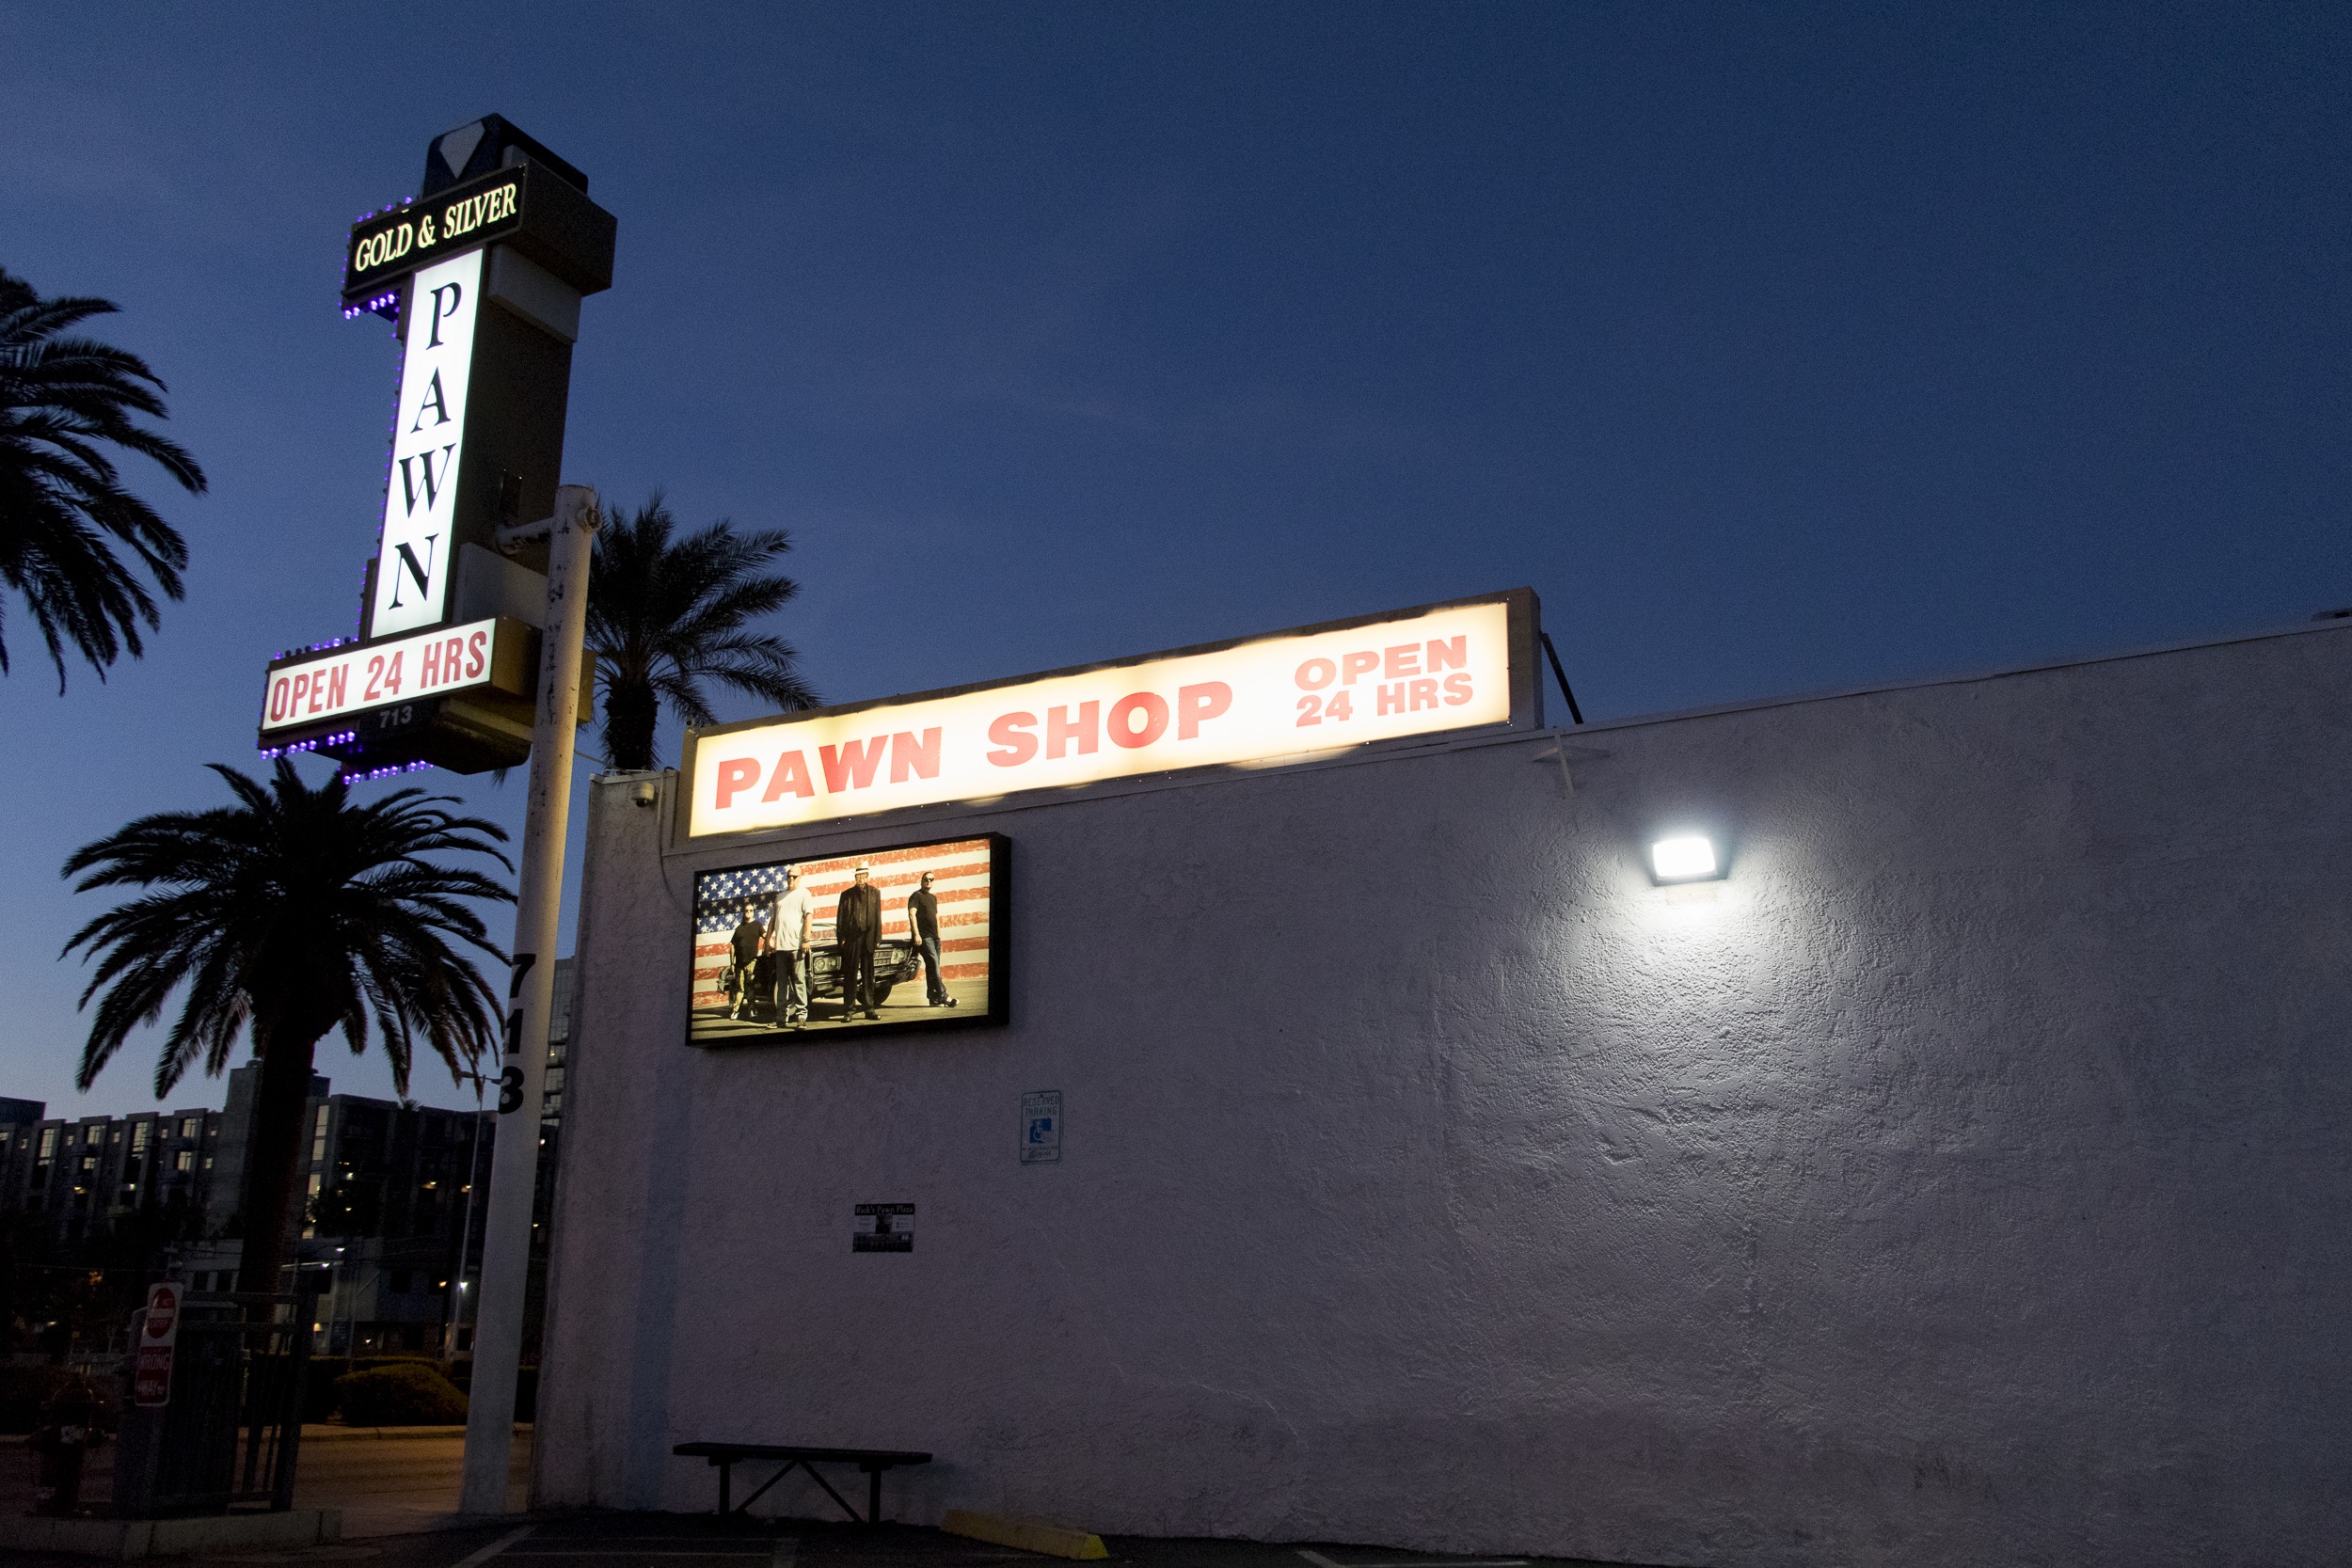 Photographs of Gold and Silver Pawn Shop signs, Las Vegas (Nev.), March 3, 2017